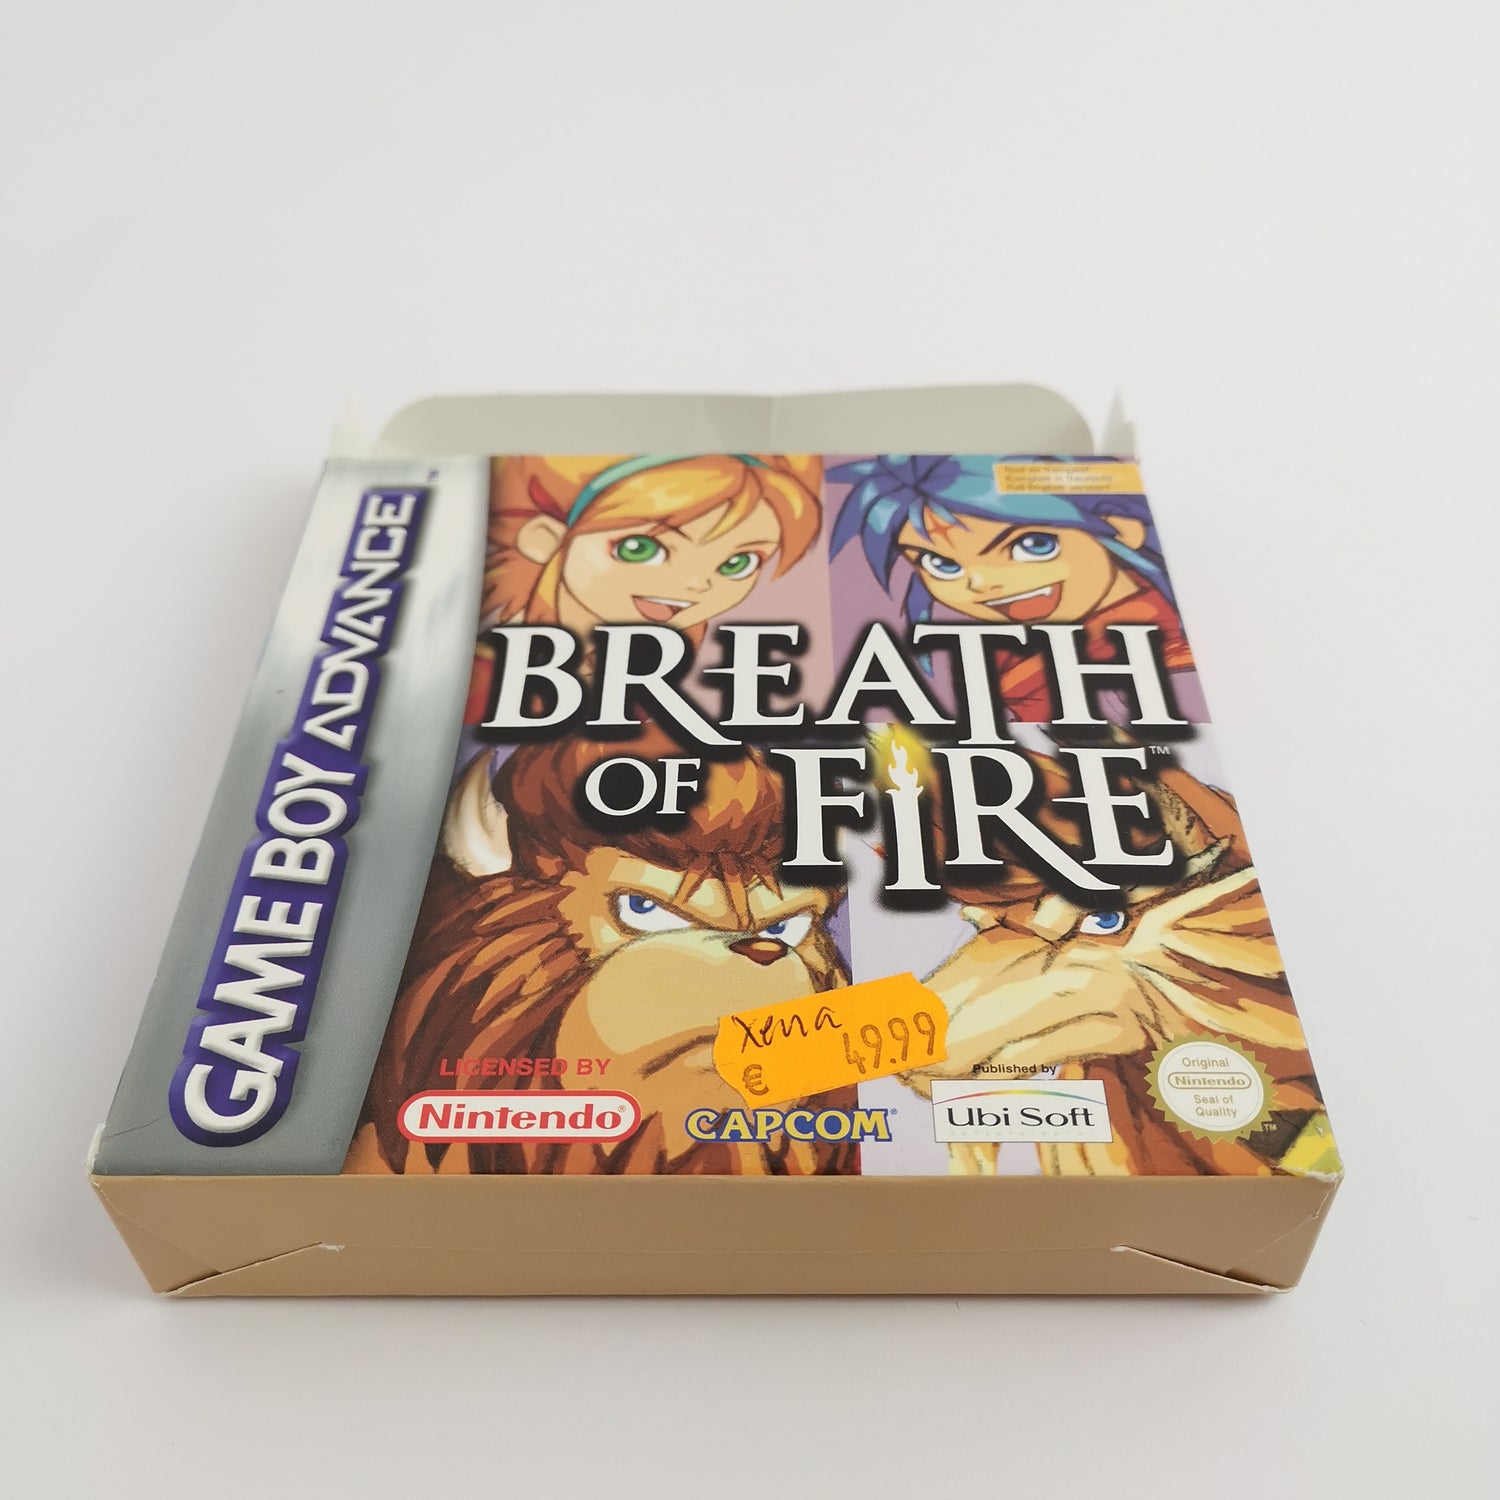 Nintendo Game Boy Advance Game: Breath of Fire | GBA Gameboy - OVP PAL EUR